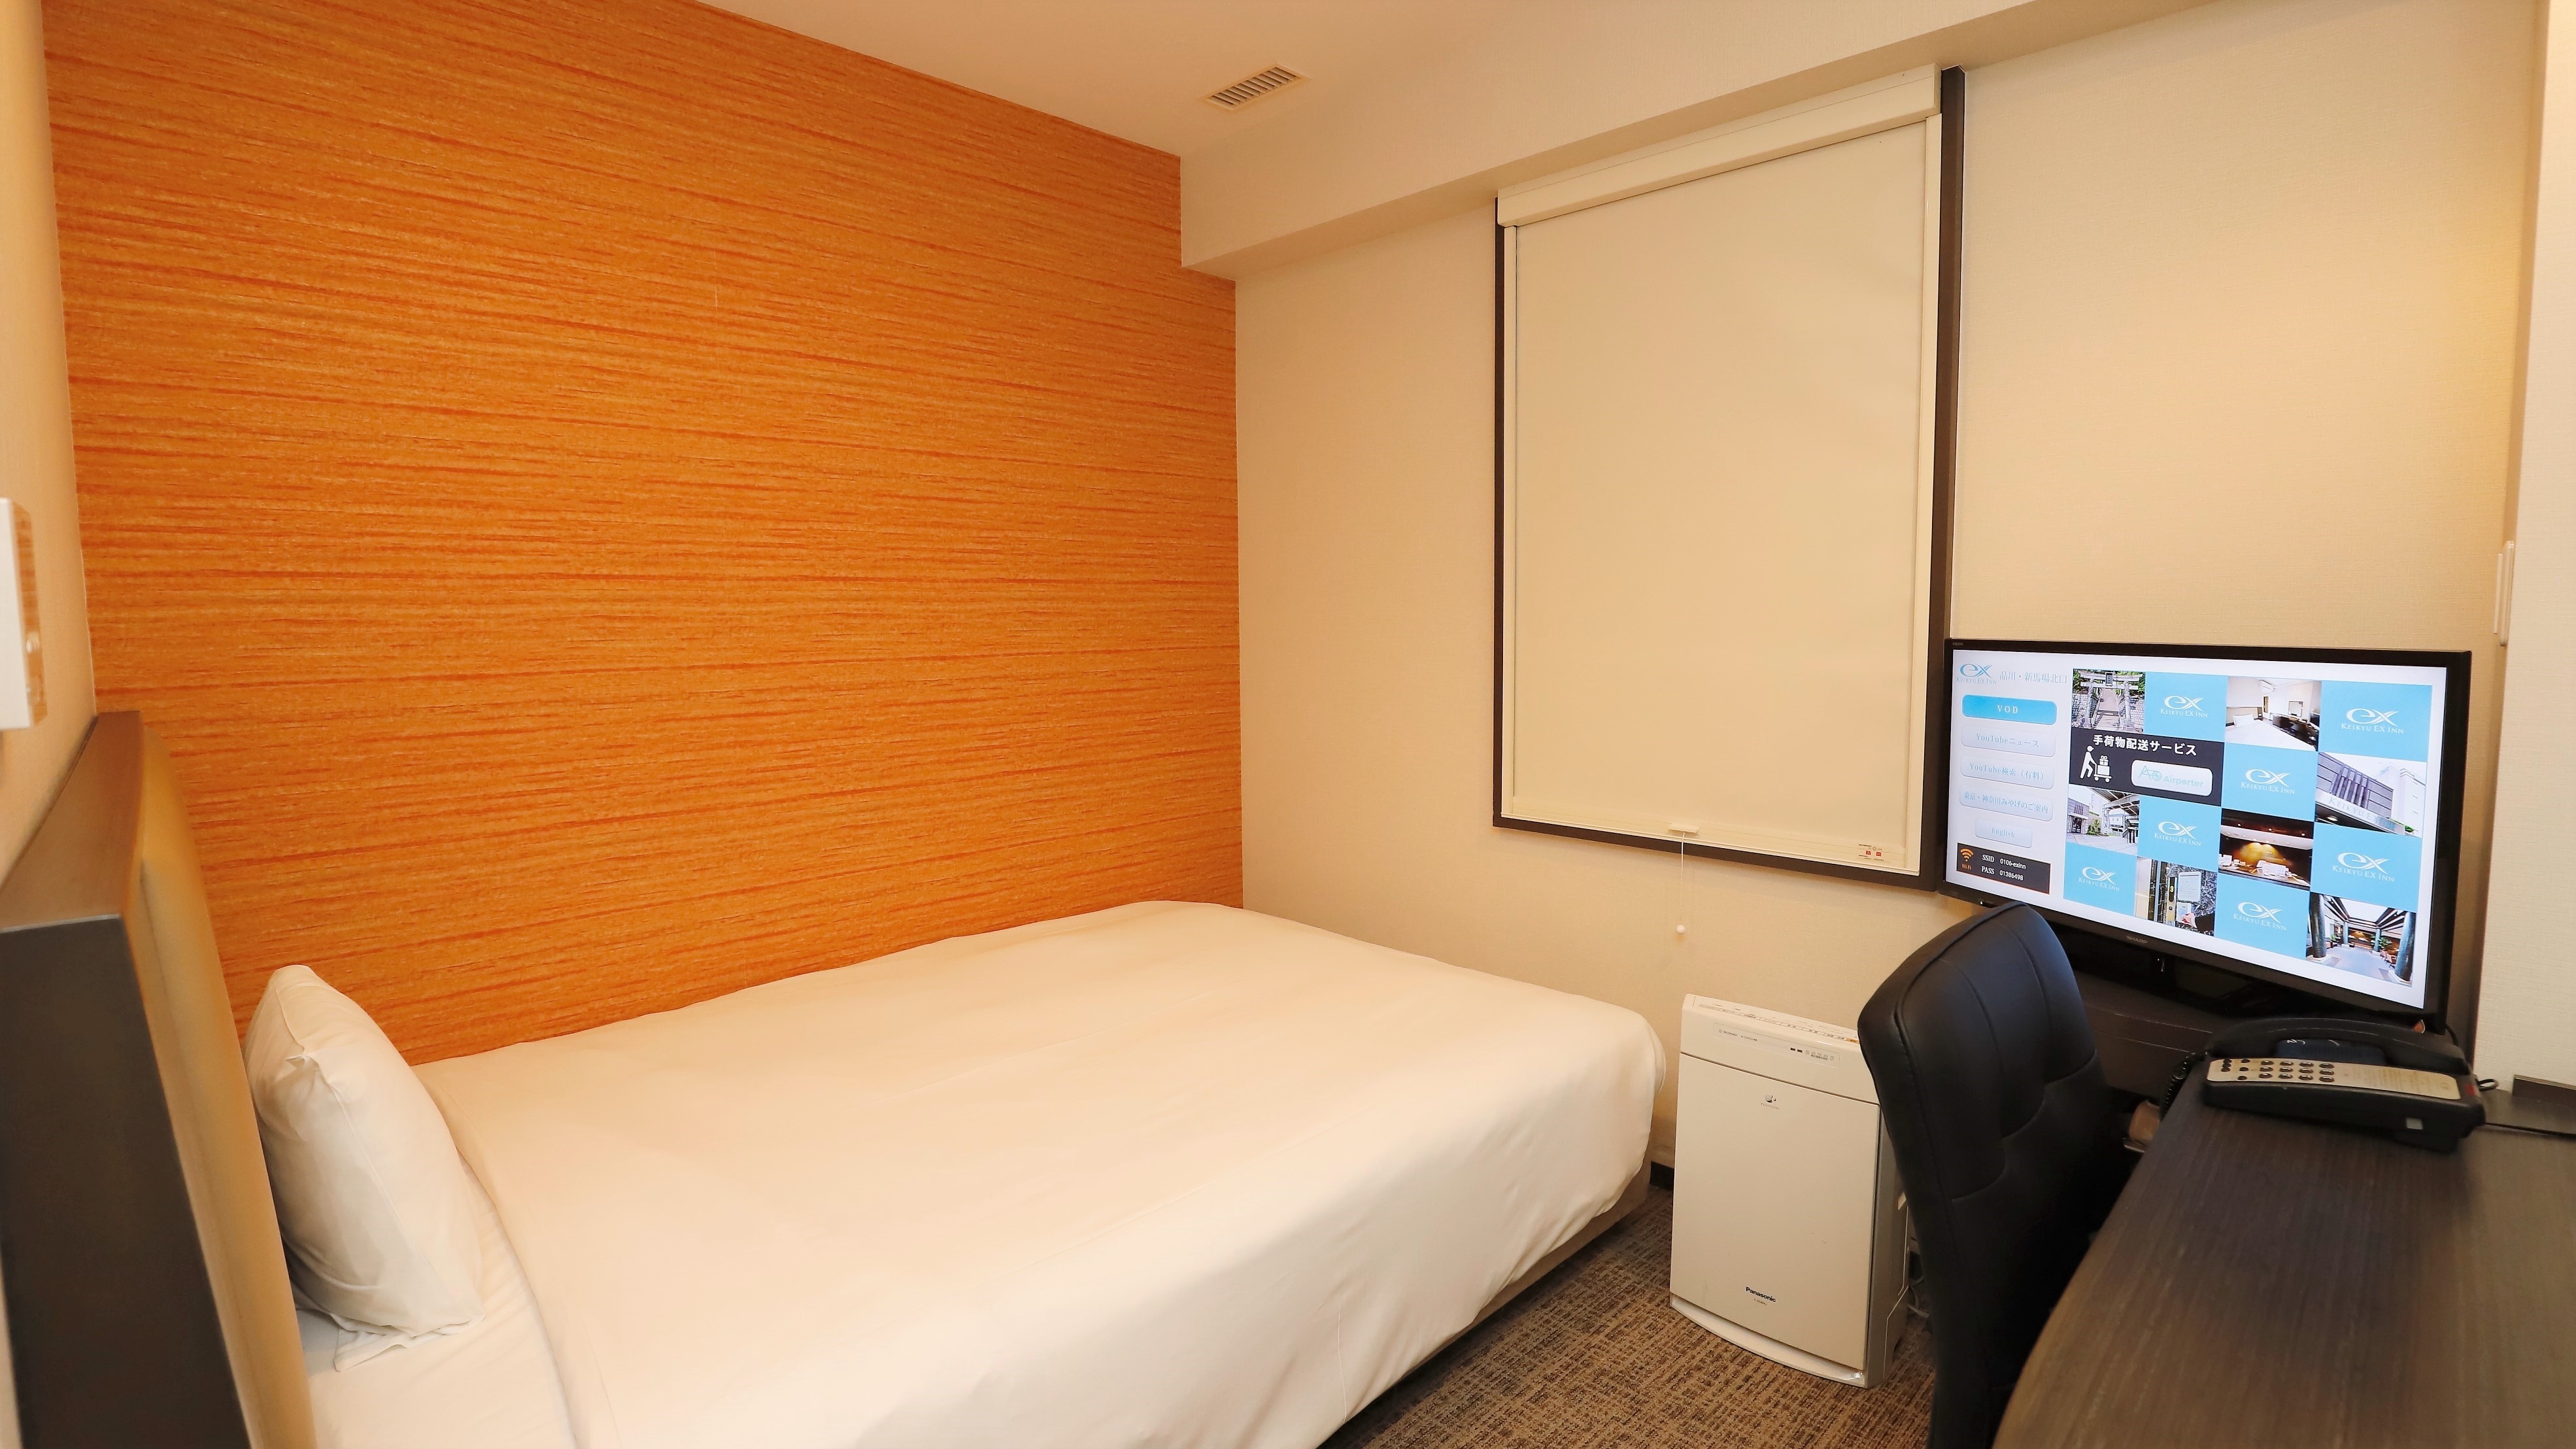 Single room 13.5㎡ Semi-double bed 140 & times; 200cm